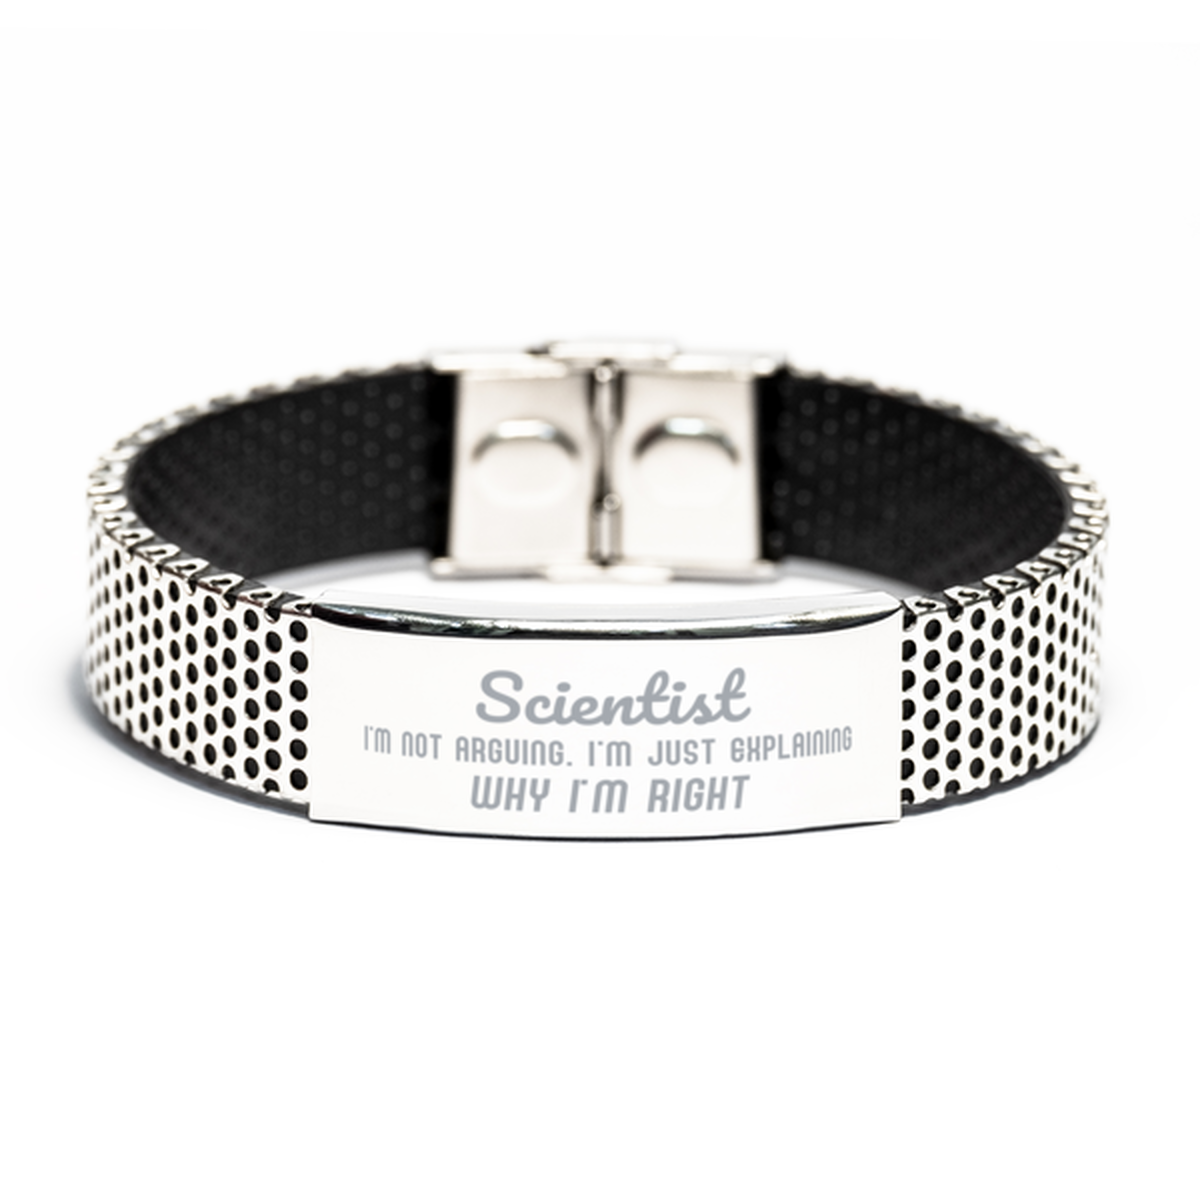 Scientist I'm not Arguing. I'm Just Explaining Why I'm RIGHT Stainless Steel Bracelet, Funny Saying Quote Scientist Gifts For Scientist Graduation Birthday Christmas Gifts for Men Women Coworker